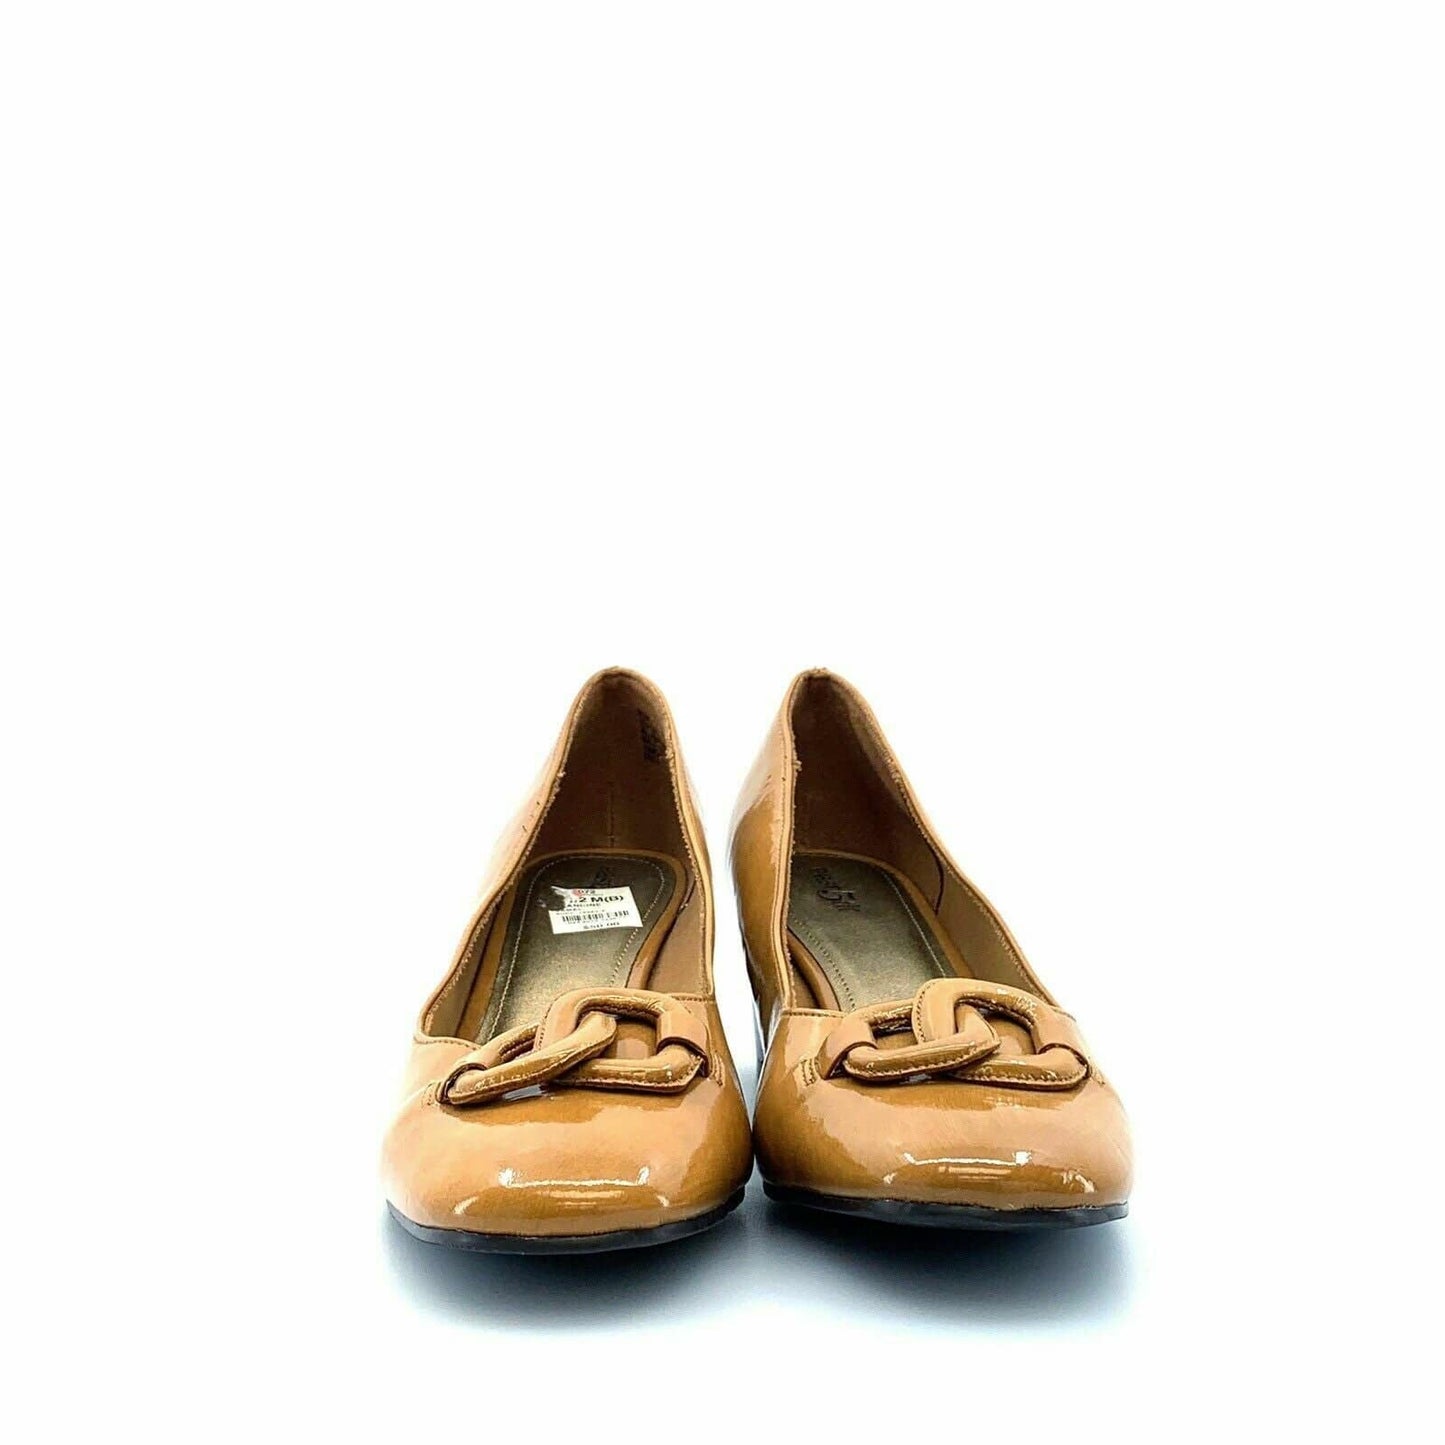 East 5th Womens Size 9.5M Tan Brown Pumps Heels “Francine” Faux Patent Leather